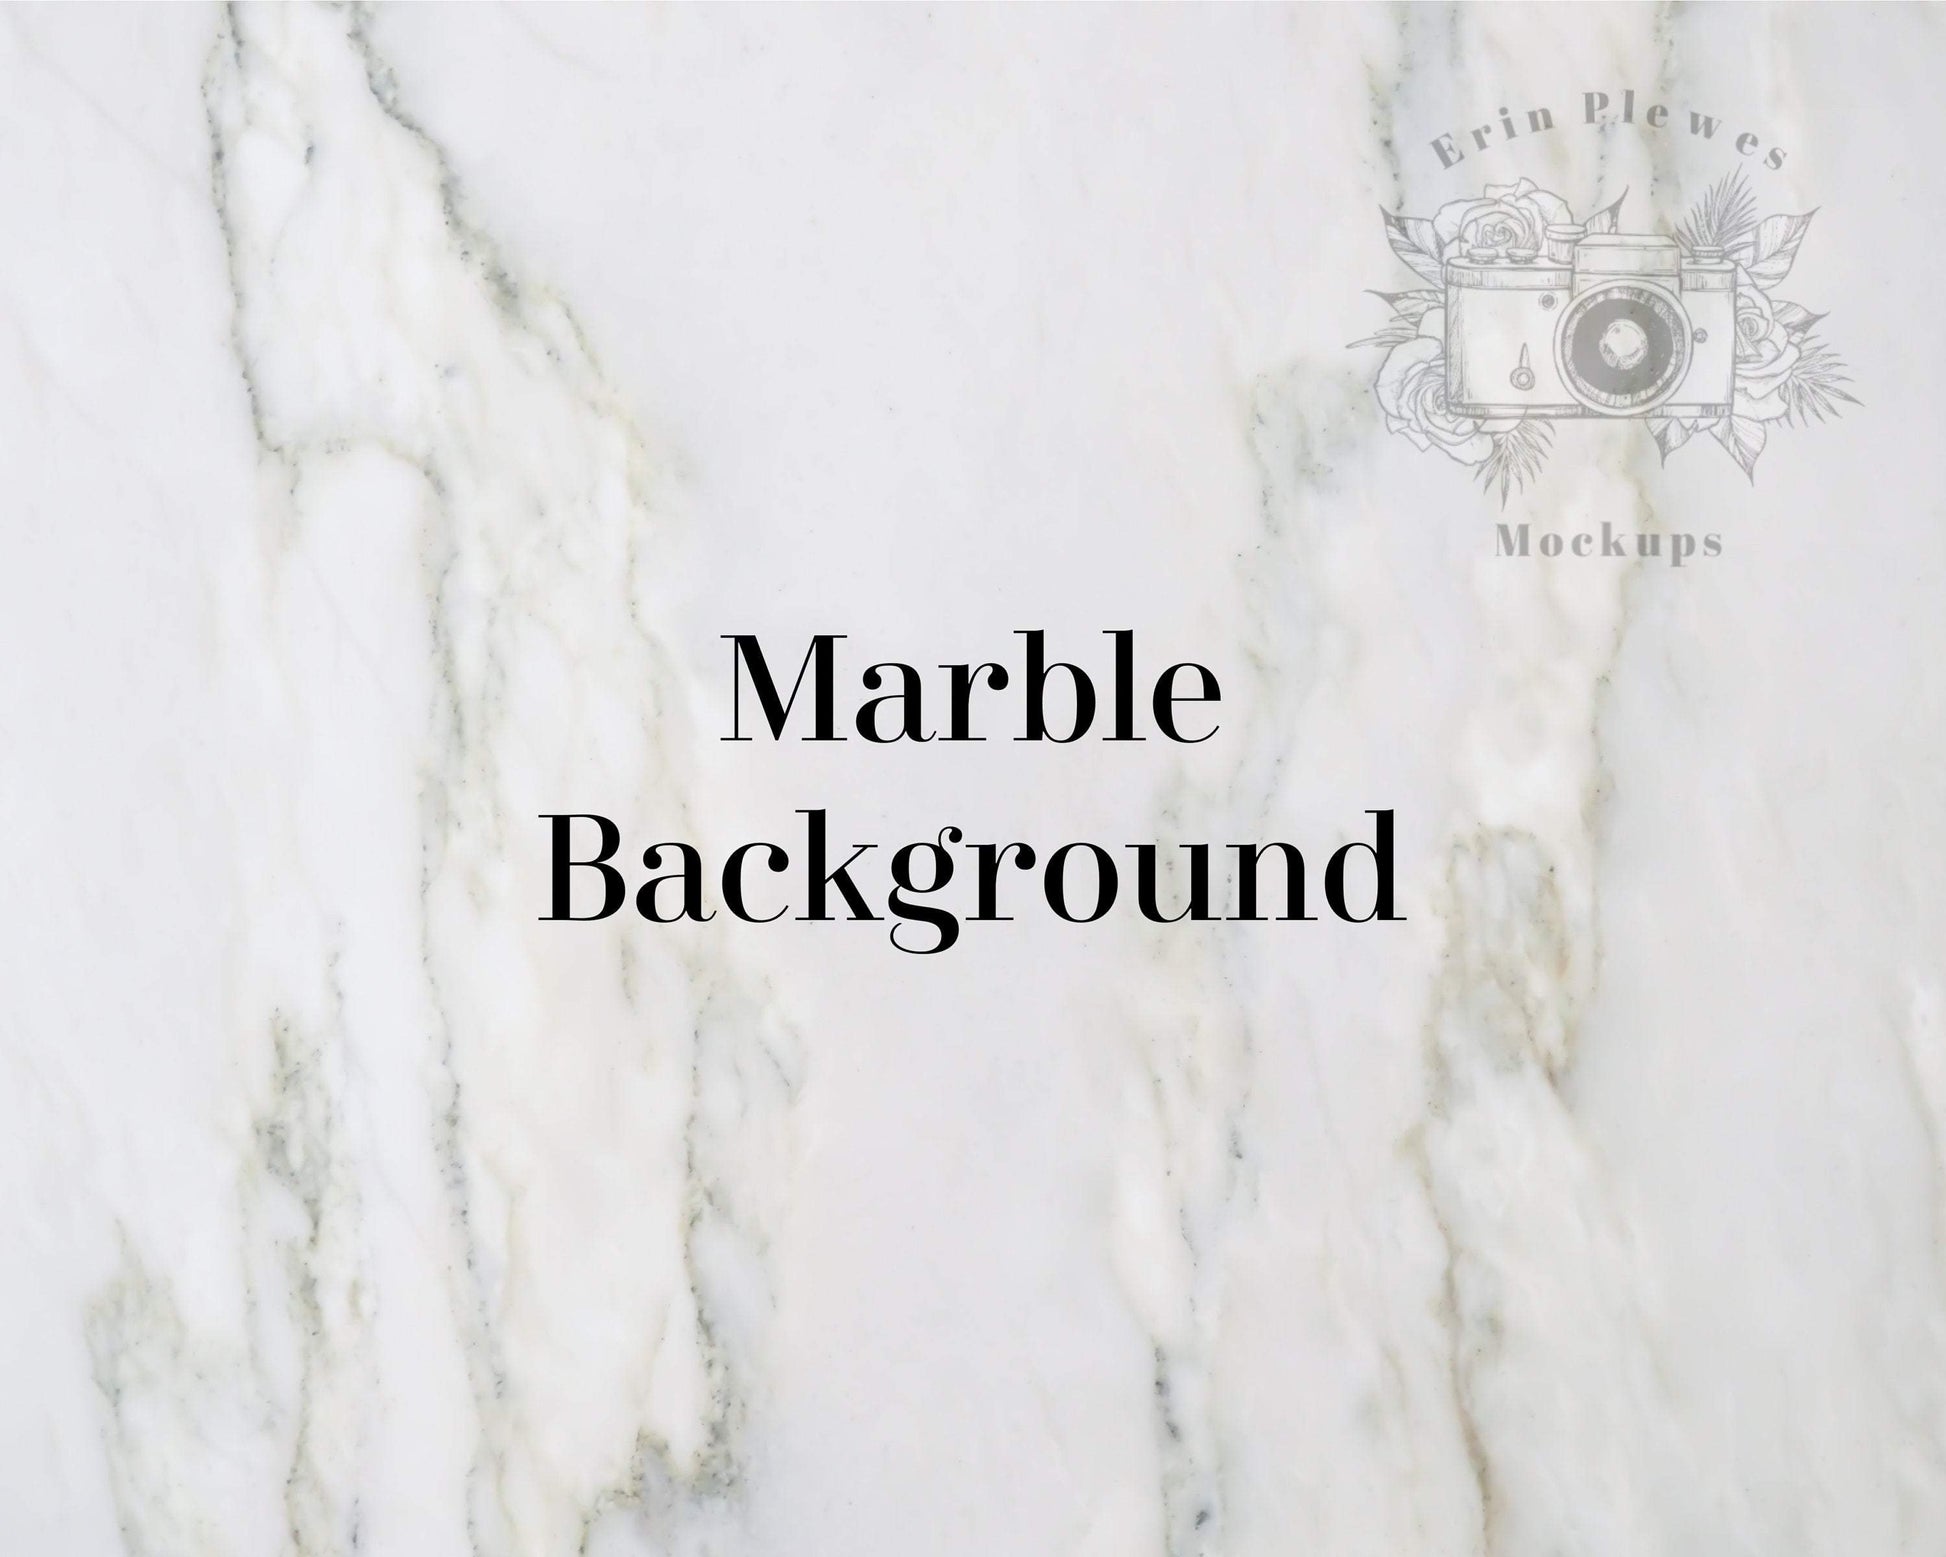 Erin Plewes Mockups Marble Print Digital Paper, Marble Product Background for Wedding Styled Stock Photography, Marble Digital Texture Instant Download